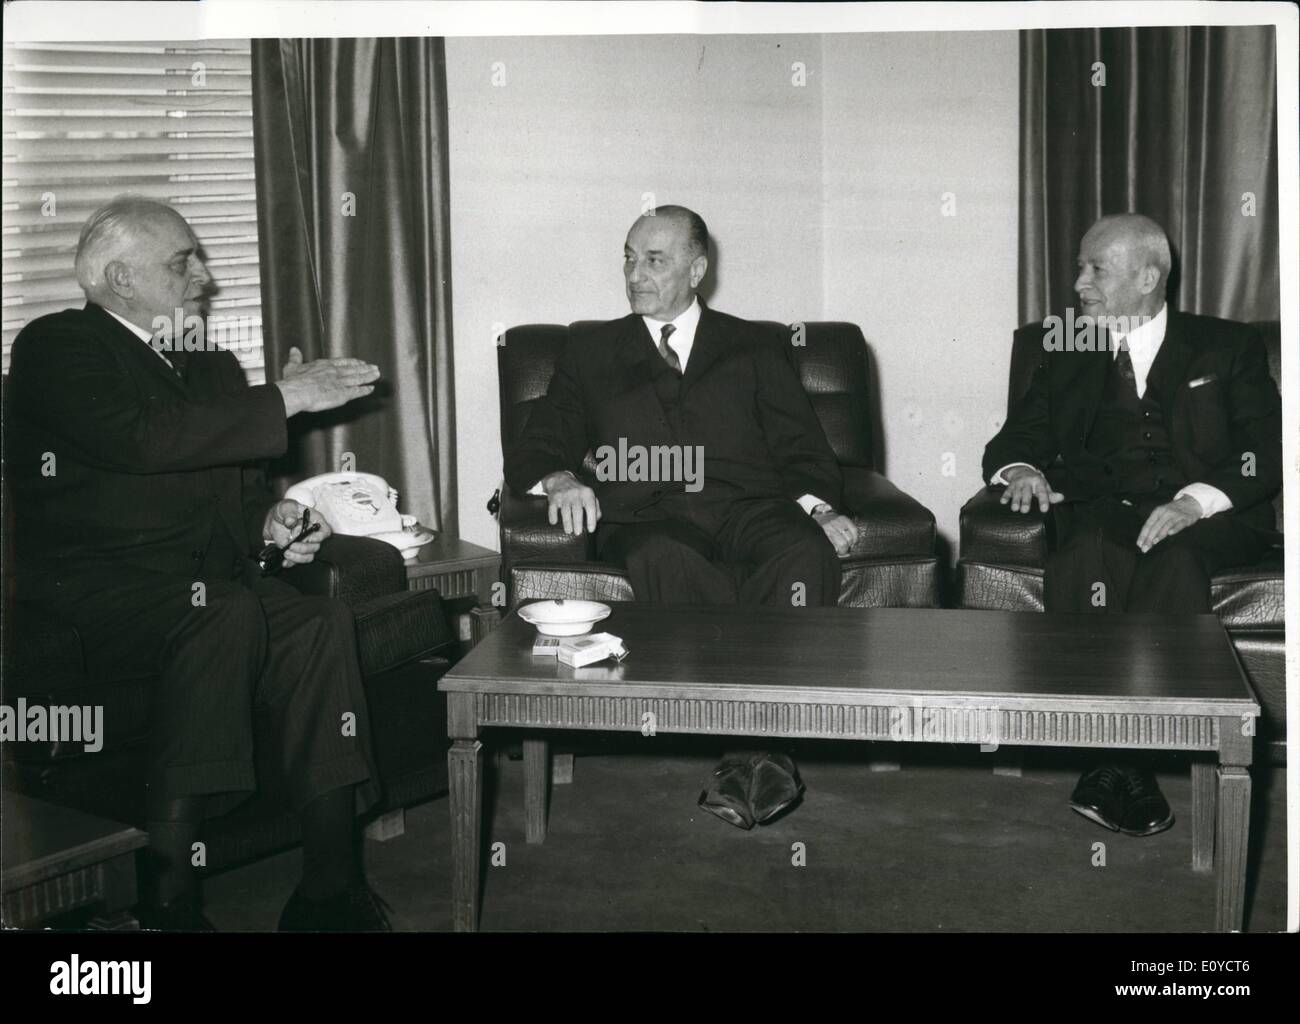 Nov. 11, 1969 - Jordanian Premier Mr. Bahjat Talhouni (middle) during a meeting with Mr. Davies director of the middle East American Association for refugee a fairs (left side) The meeting attended by deputy premier Mr. Ahmad Touqan (right) Stock Photo